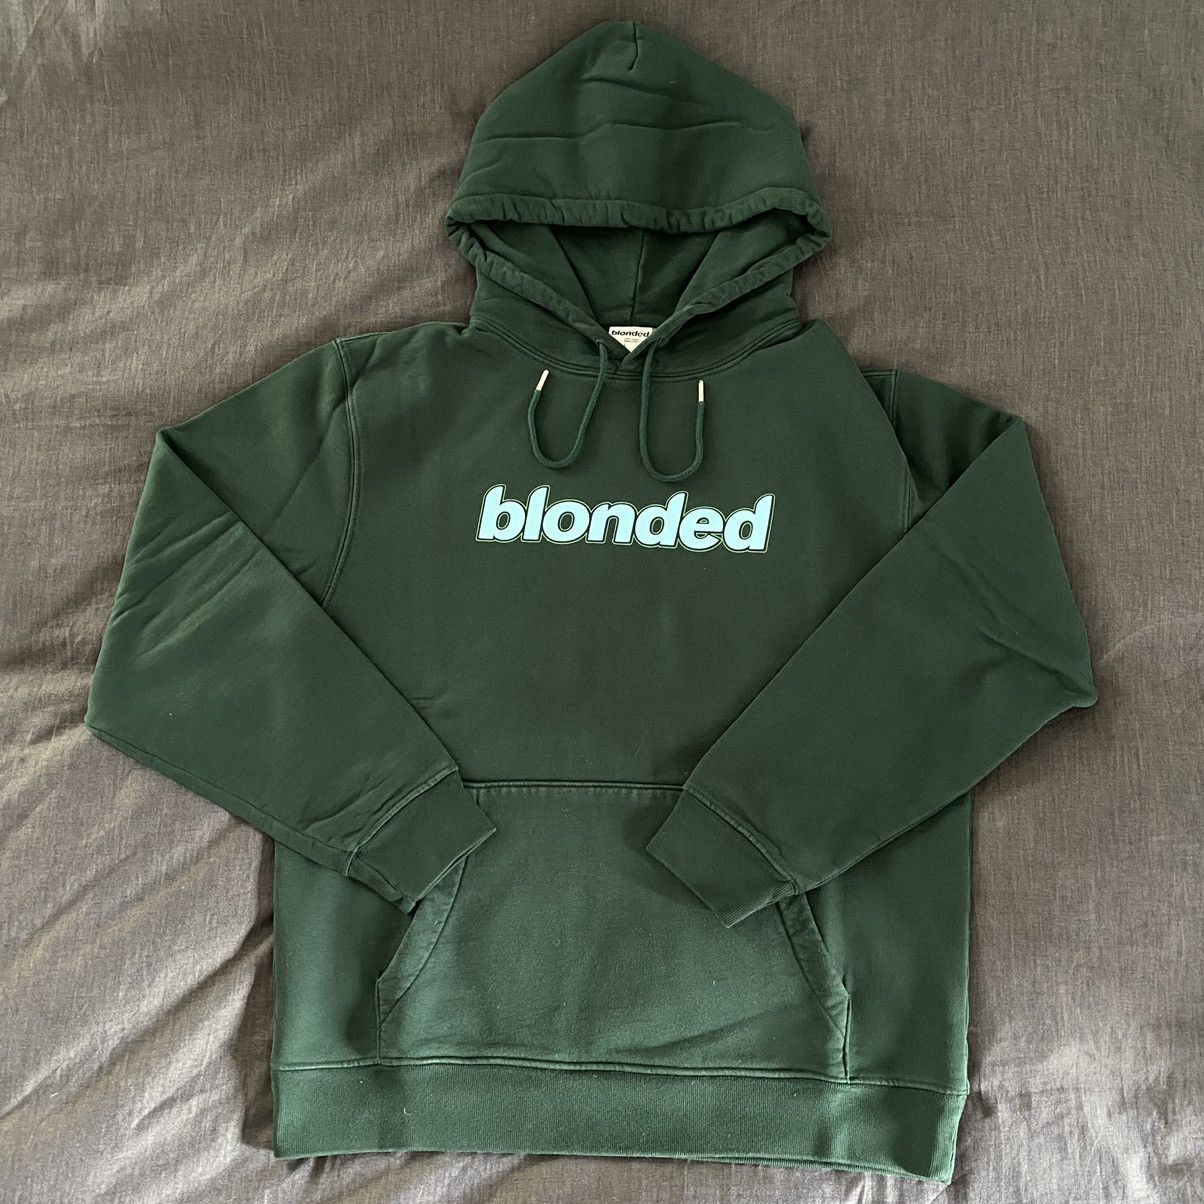 Frank Ocean Blonded Hoodie (Green) Size US L / EU 52-54 / 3 - 1 Preview